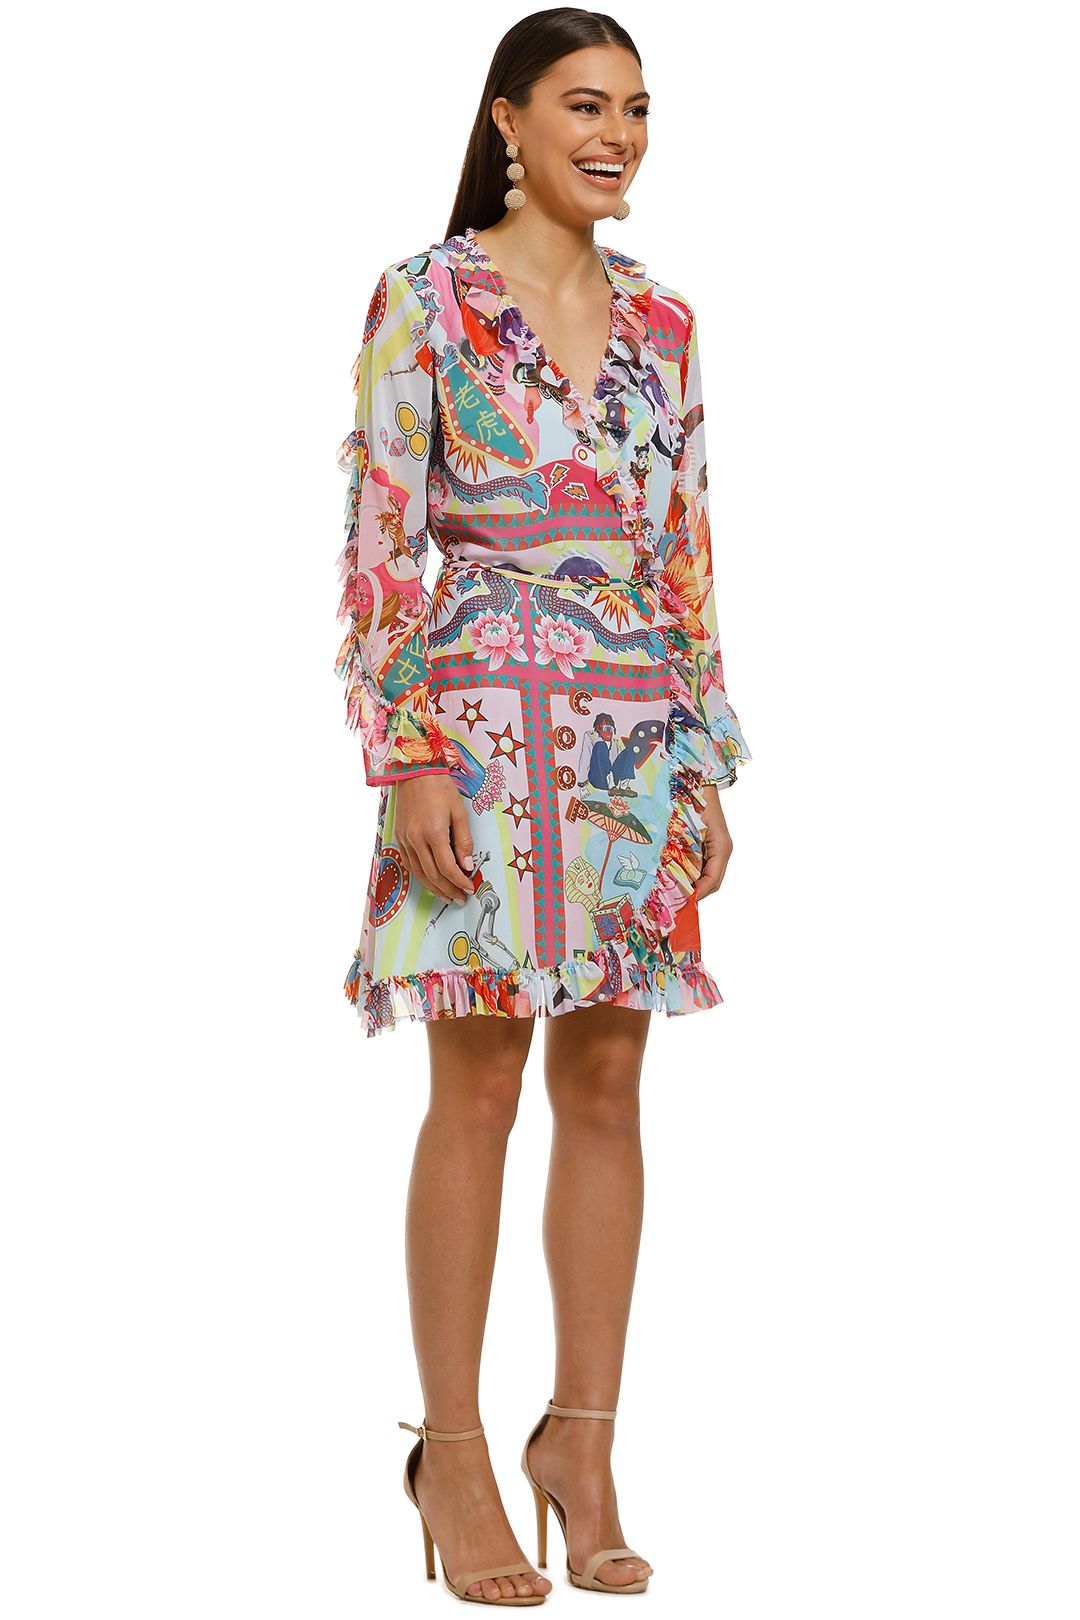 Coop-By-Trelise-Cooper-For-The-Frill-Of-It-Dress-Pink-Print-Side